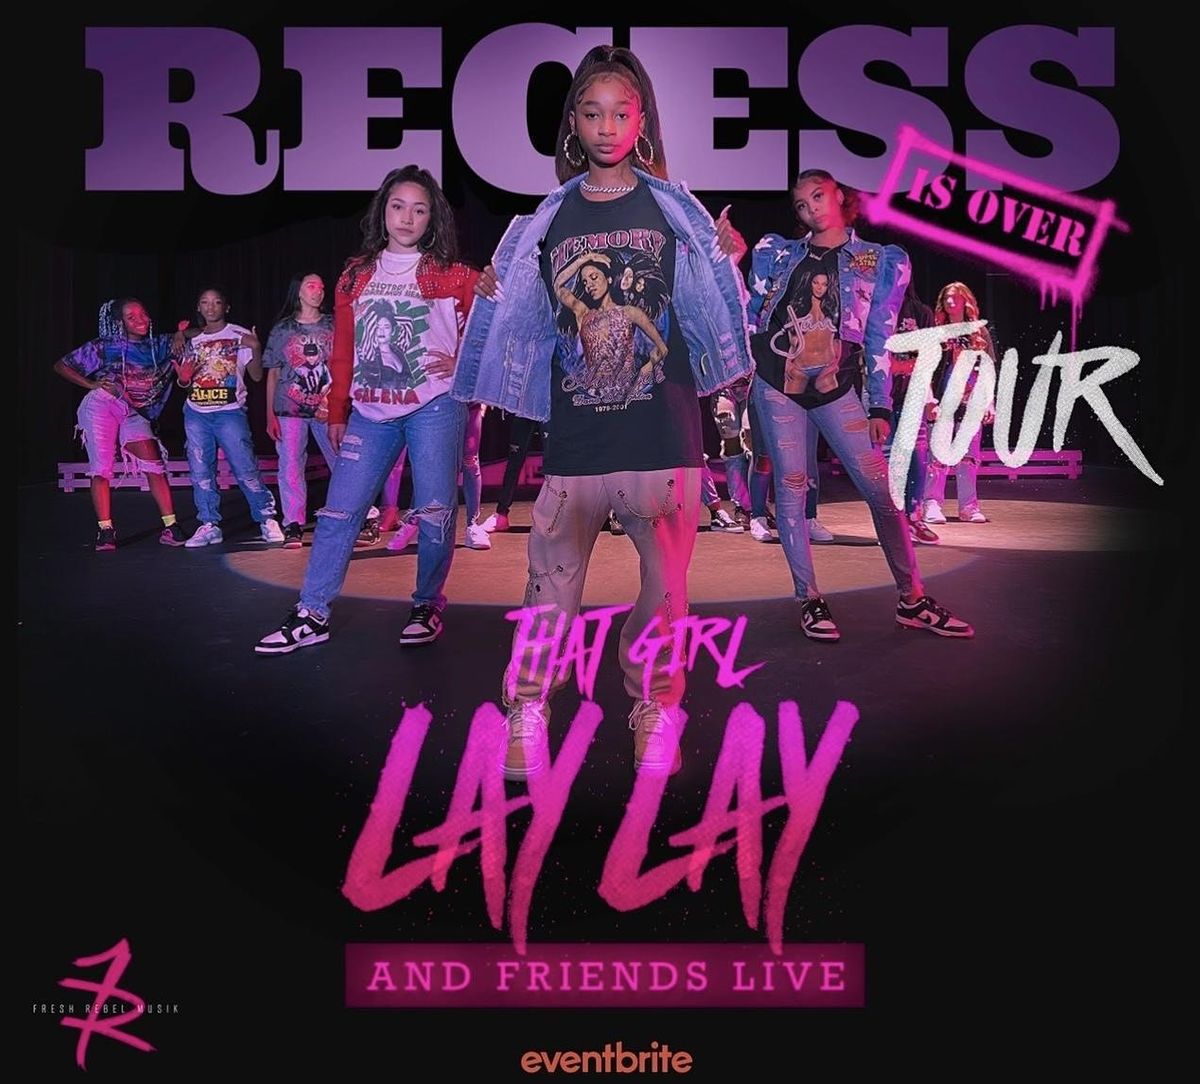 No Recess Charlotte - Middle School Turn Up Party - With That Girl Lay Lay